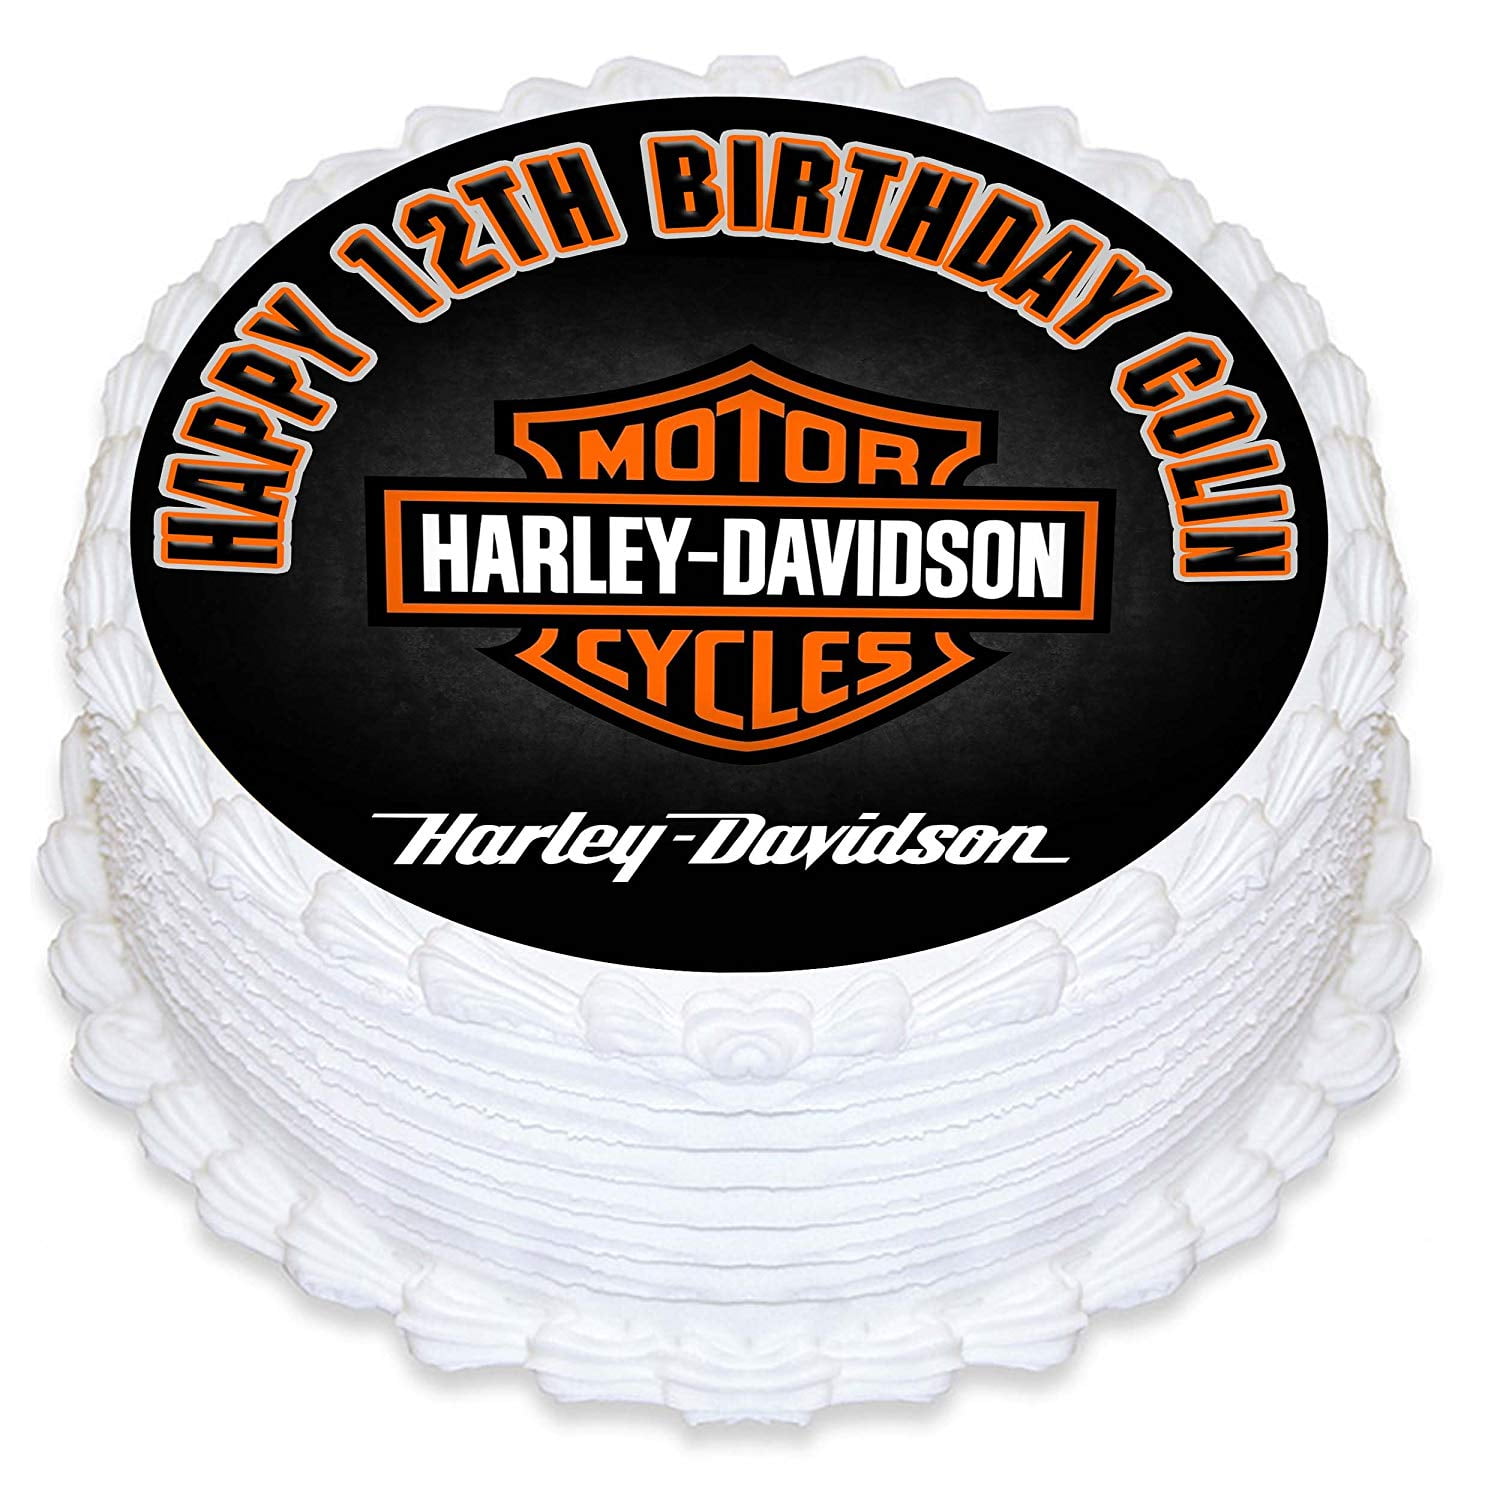 Harley Davidson Edible Cake Image Topper Personalized Birthday Party 8 Inches Round Walmart Com